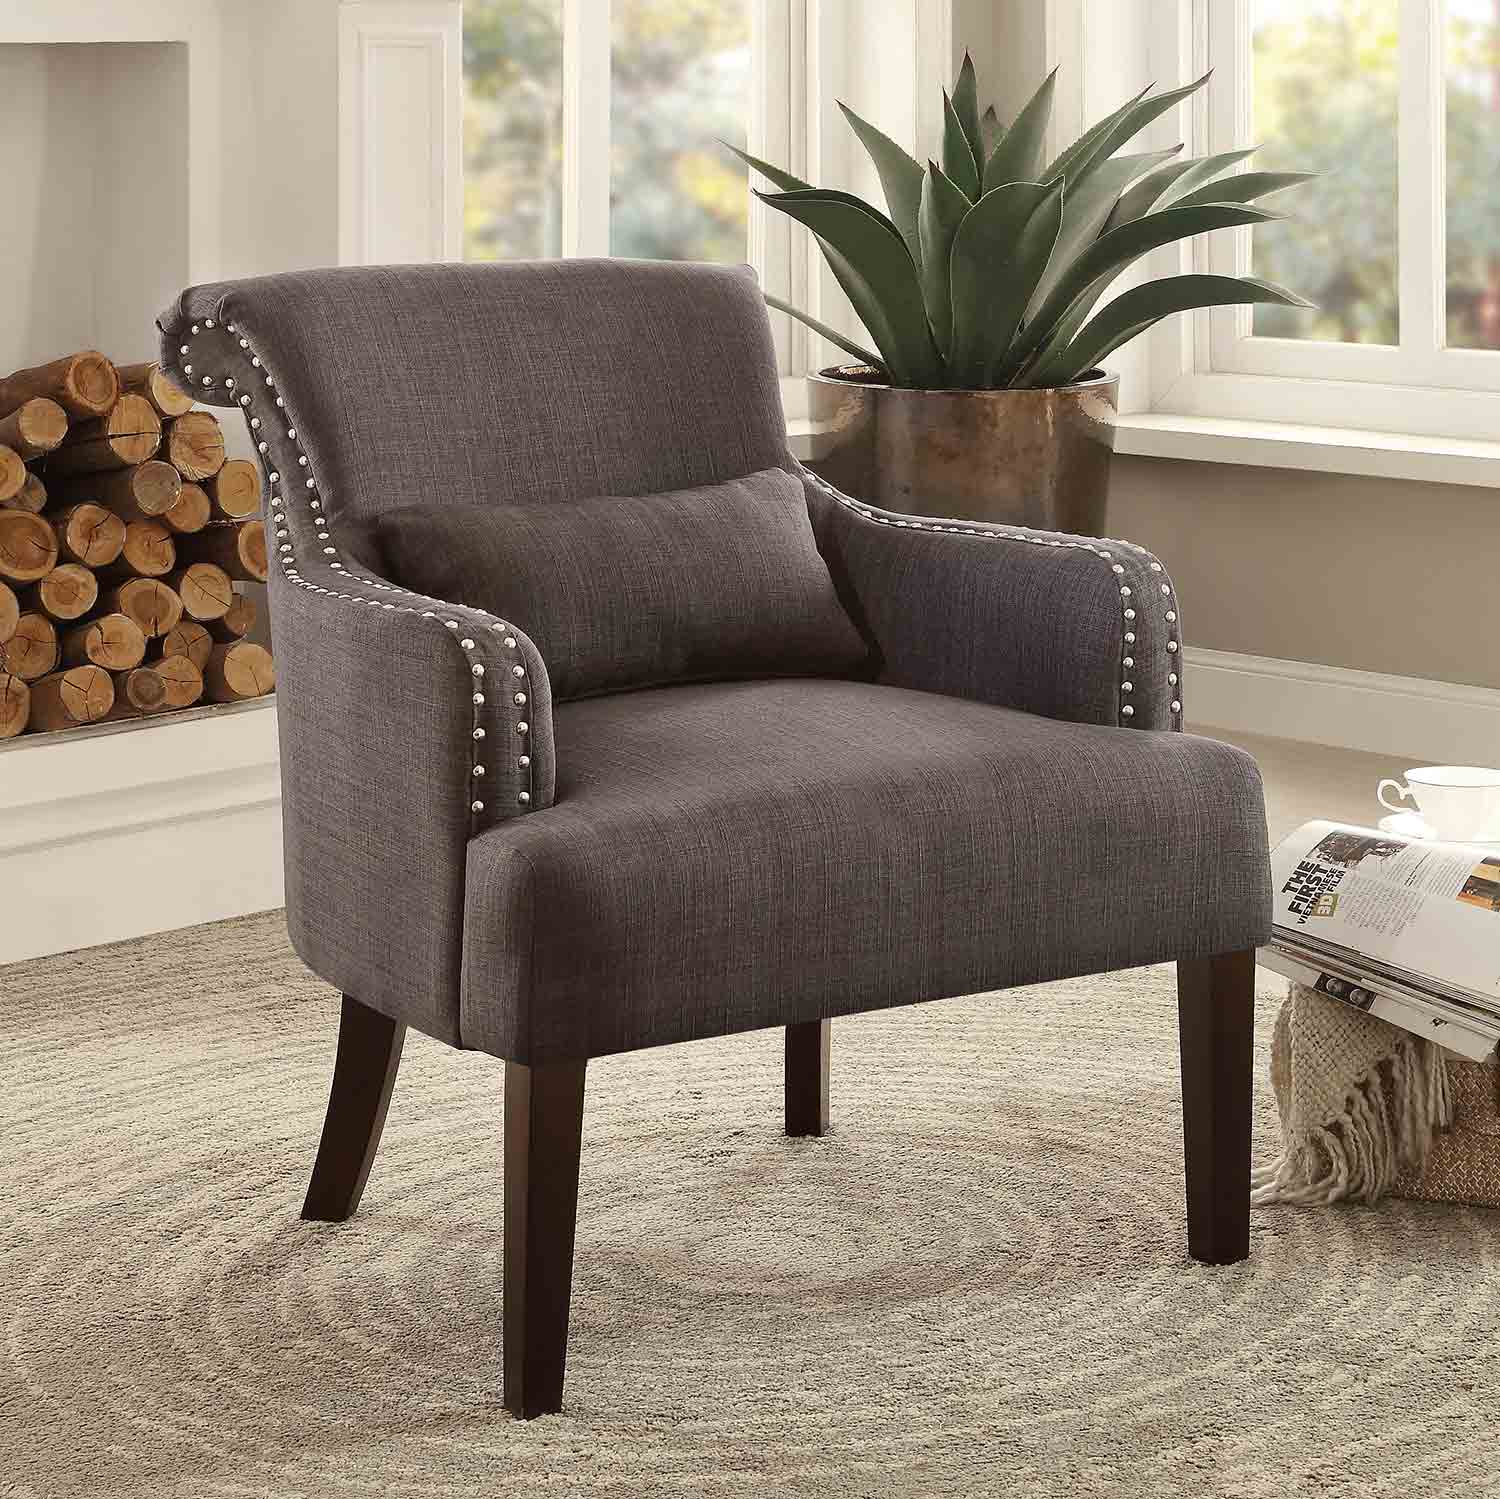 Homelegance Reedley Accent Chair with 1 Kidney Pillow - Chocolate